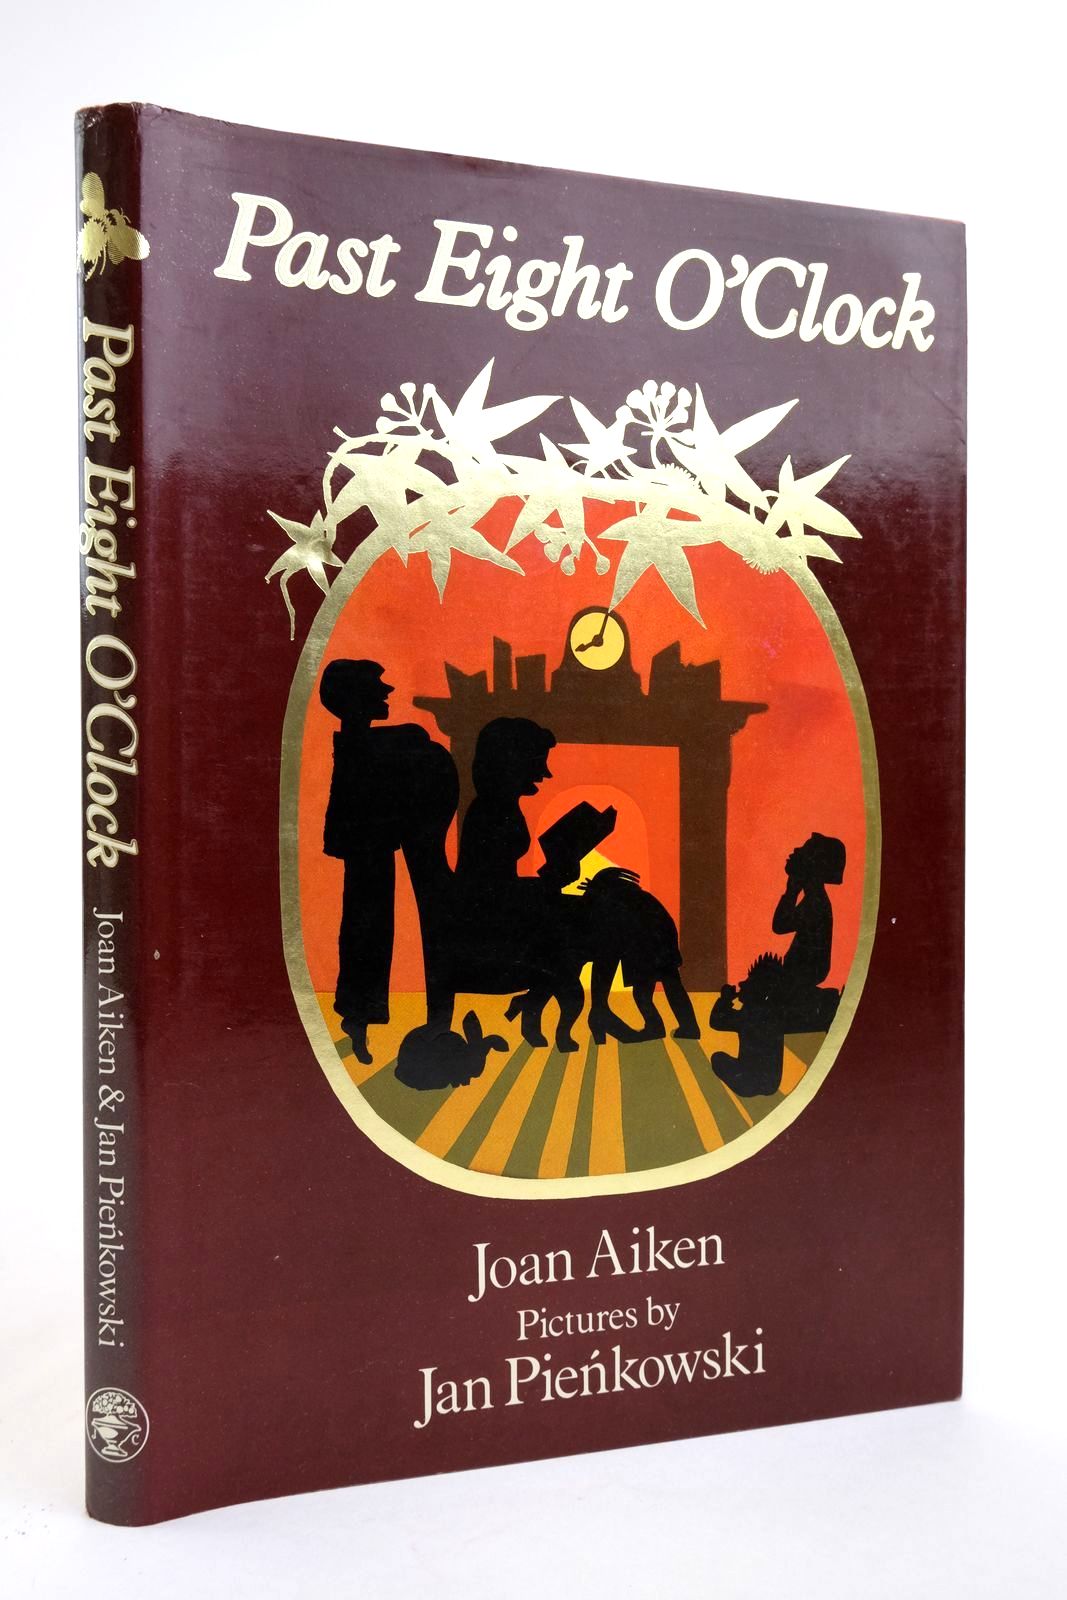 Photo of PAST EIGHT O'CLOCK written by Aiken, Joan illustrated by Pienkowski, Jan published by Jonathan Cape (STOCK CODE: 2135576)  for sale by Stella & Rose's Books